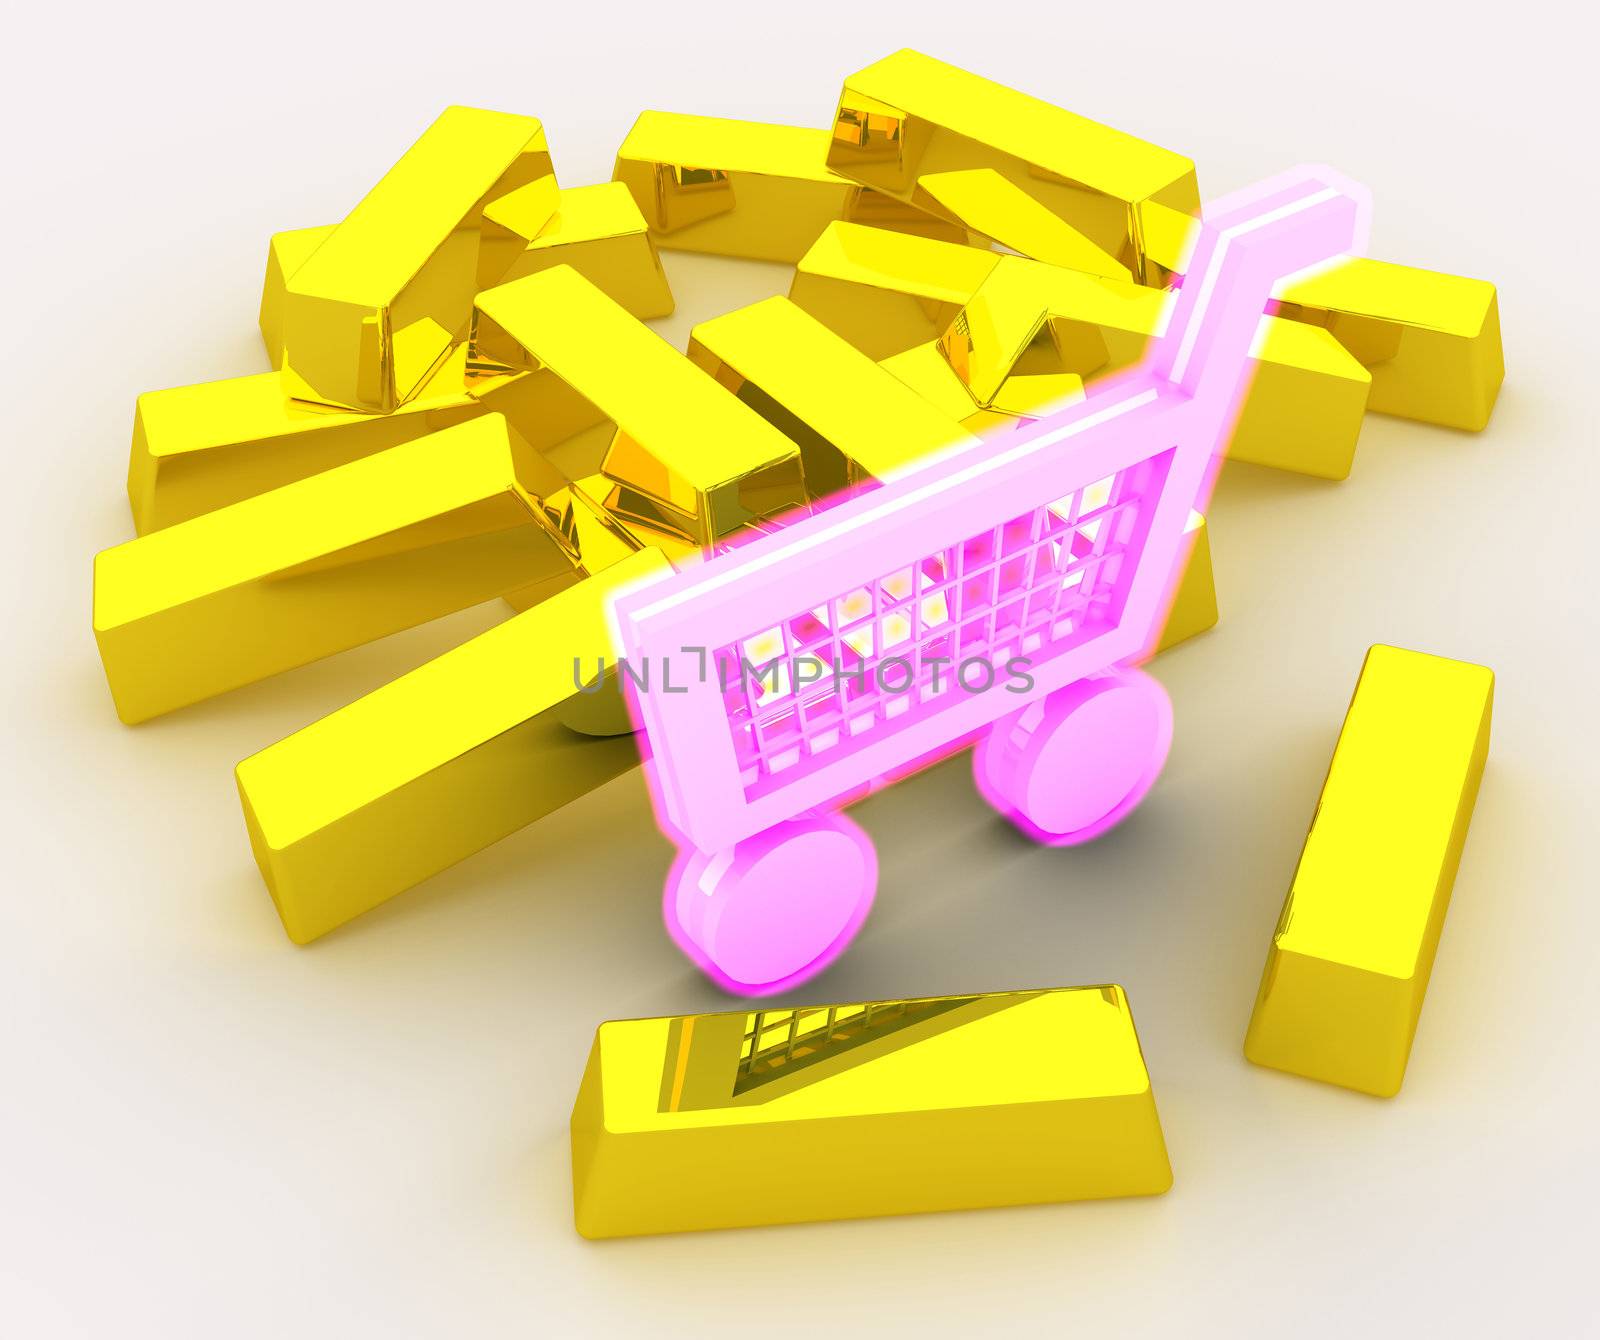 Concept of shopping addiction portrayed by shopping cart glowing in pink color placed near pile of gold bars. Scene rendered and isolated on white background.